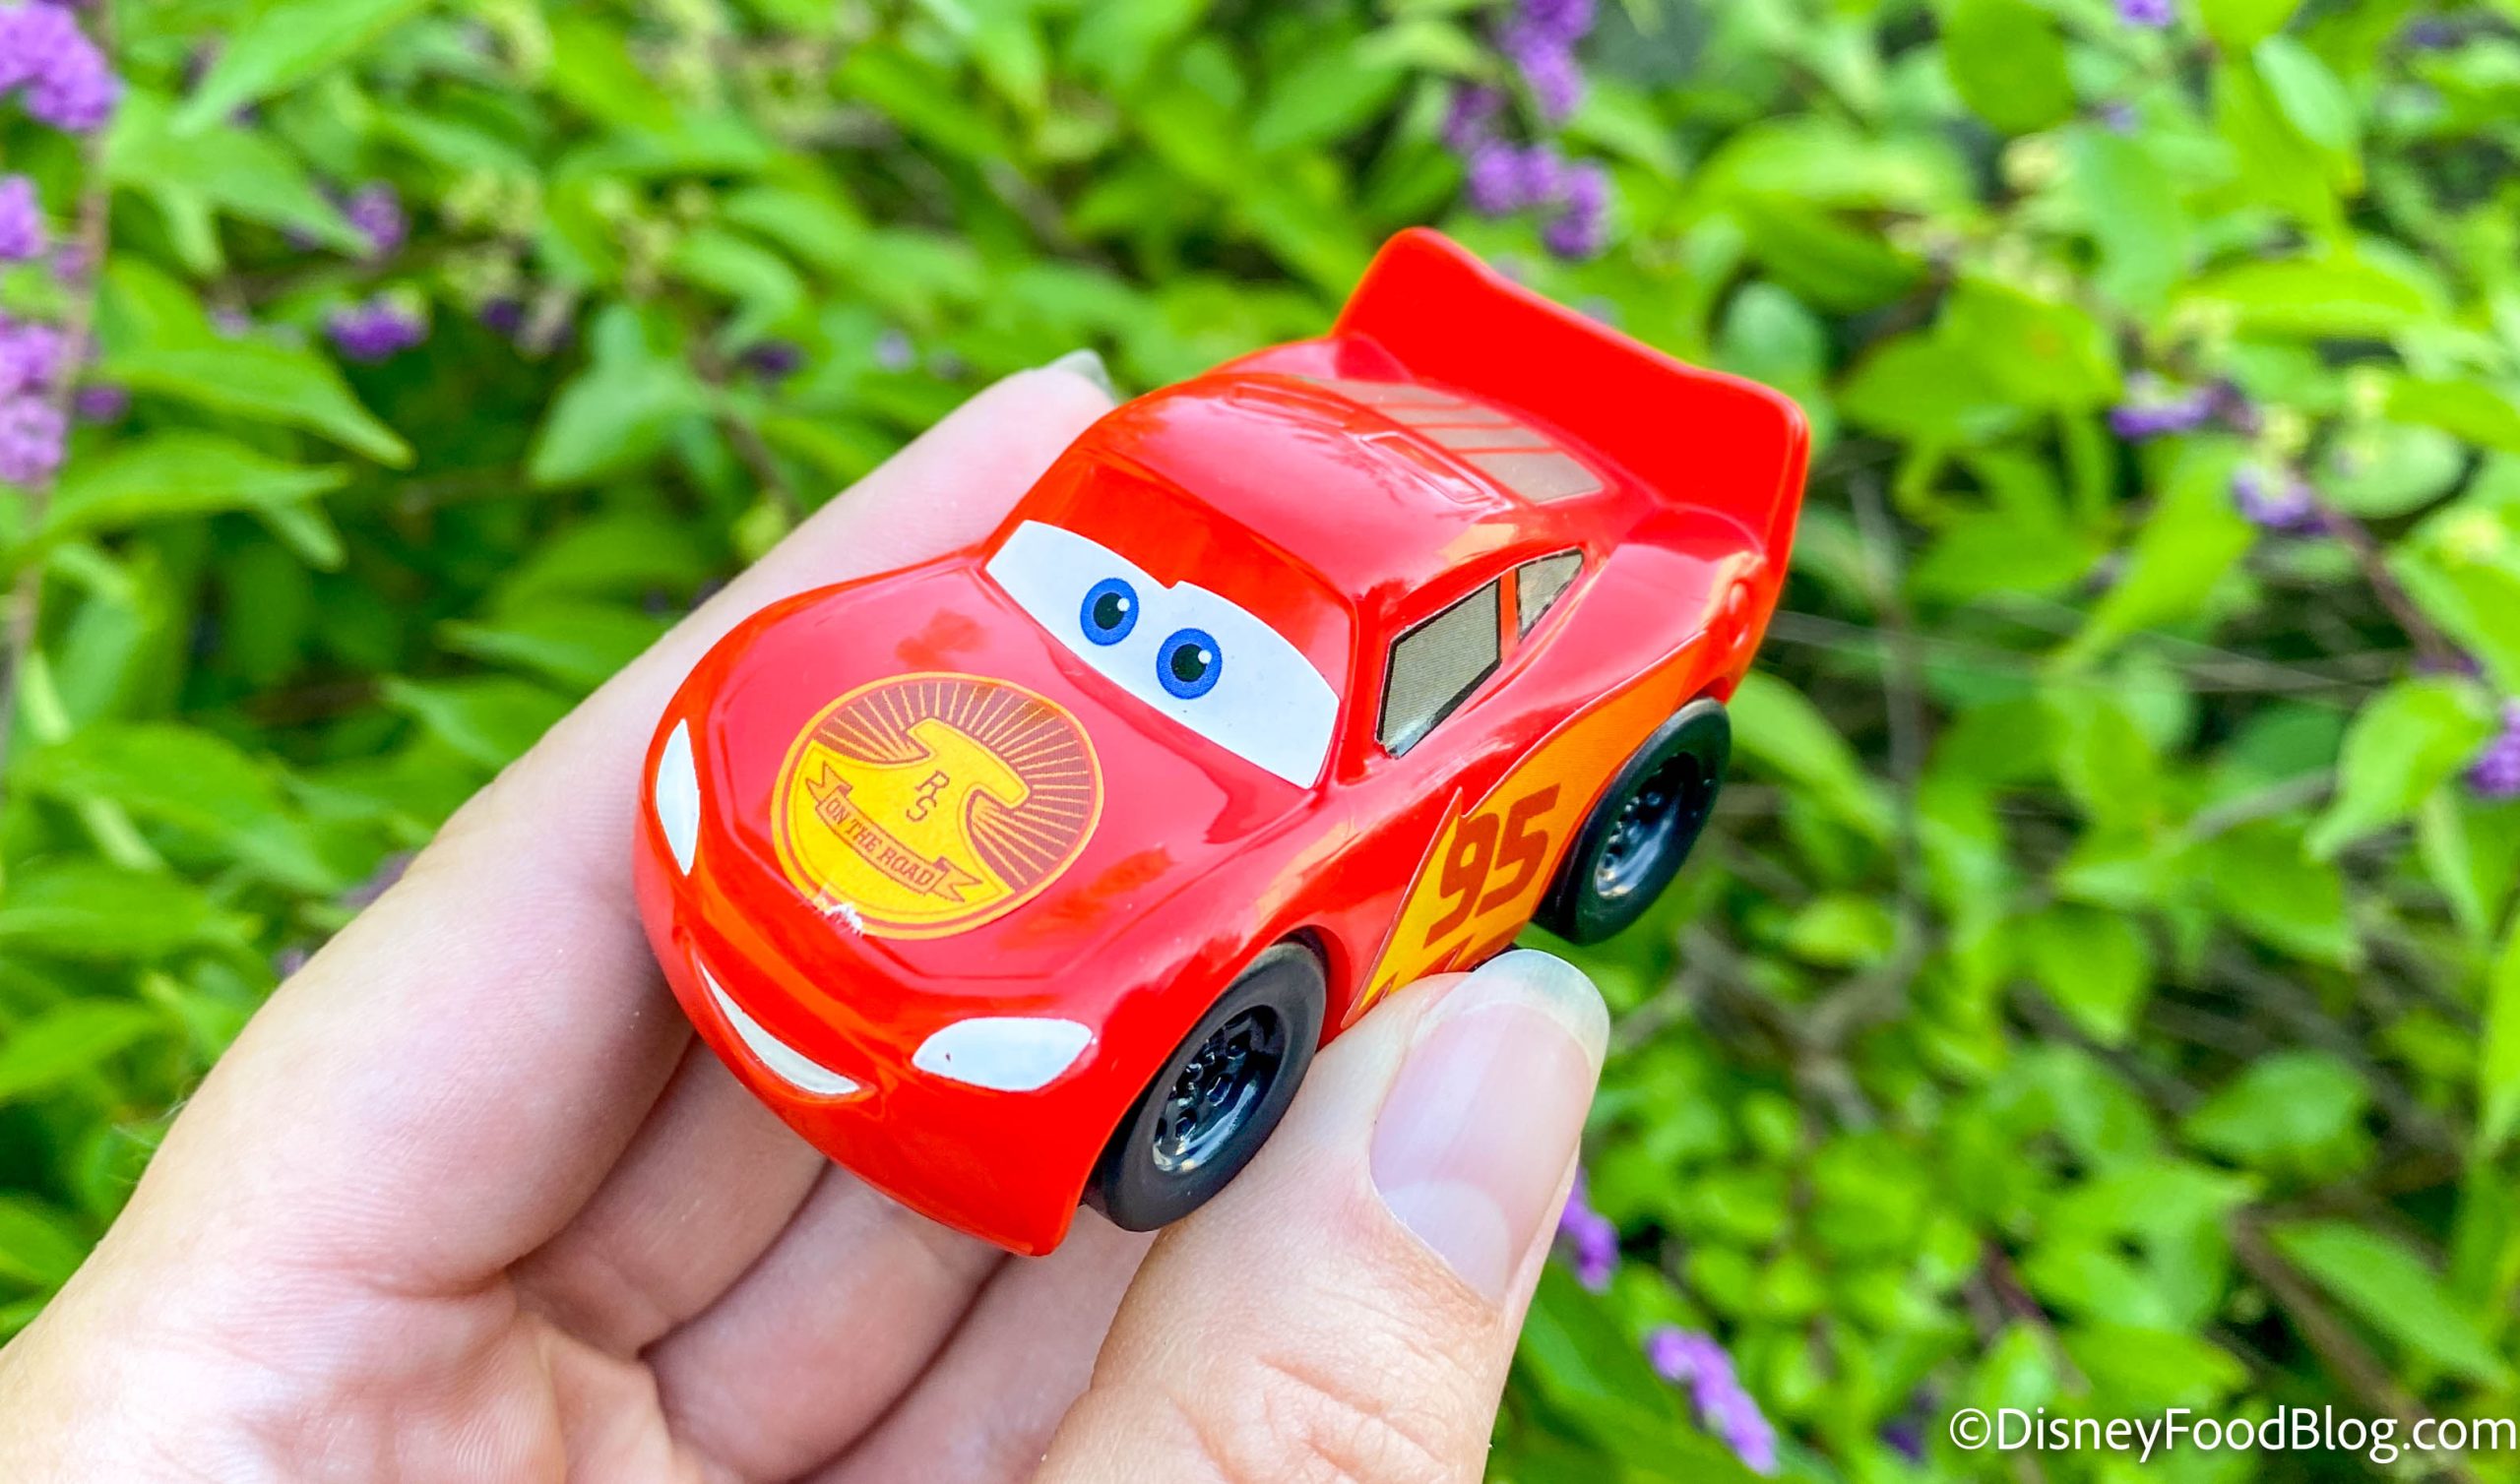 Cars on the Road Happy Meal Toys - Pixar Post